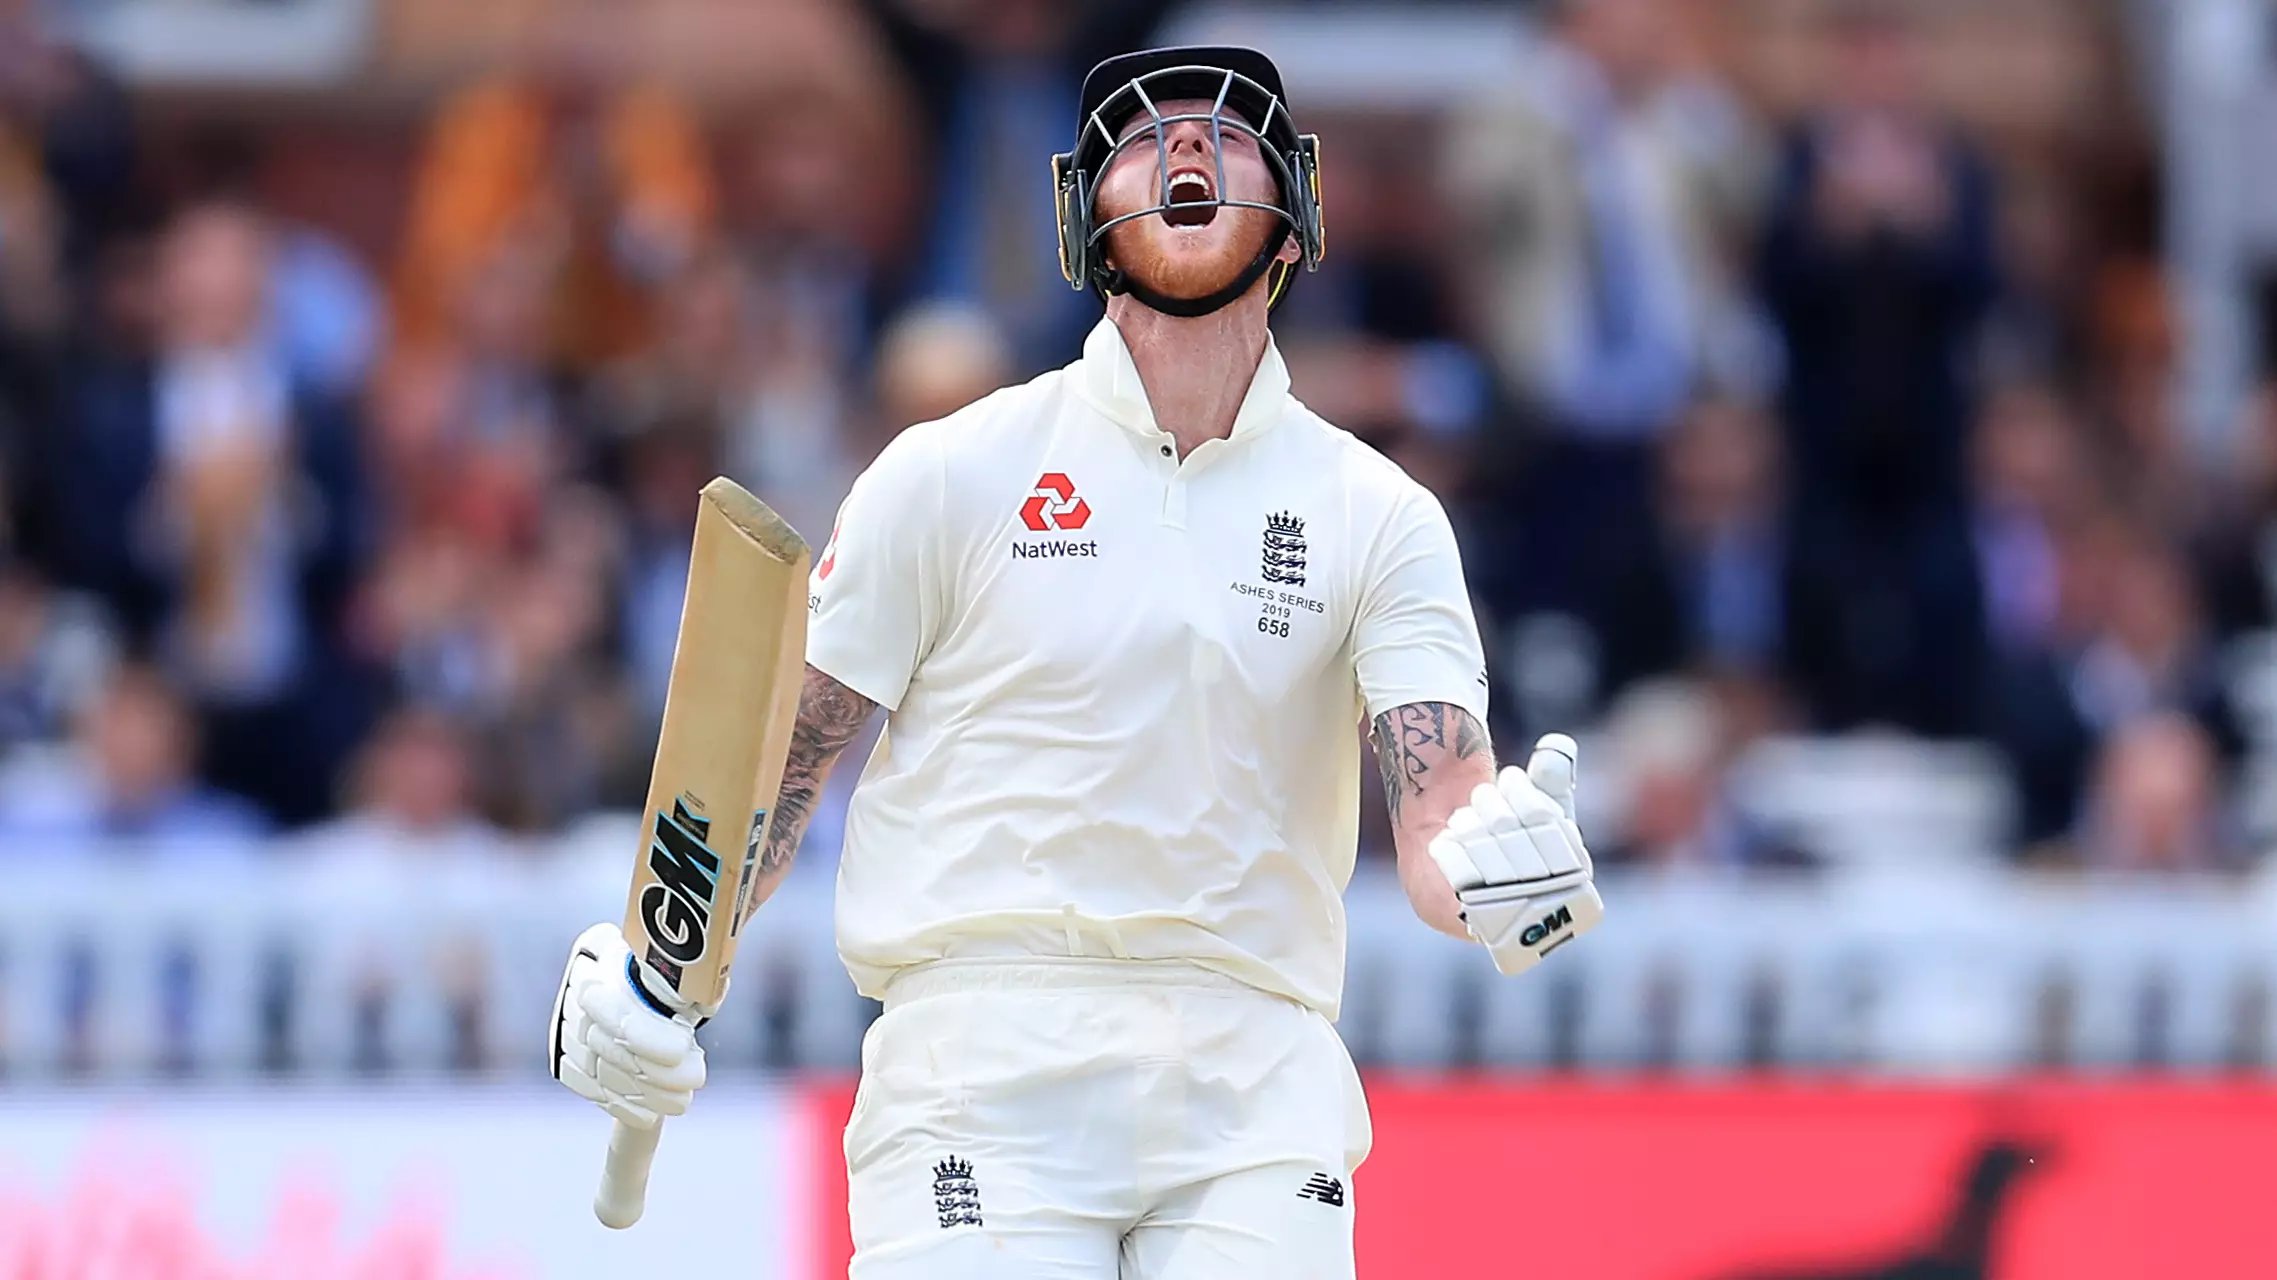 Cricketer Ben Stokes Named 2019 BBC Sports Personality Of The Year